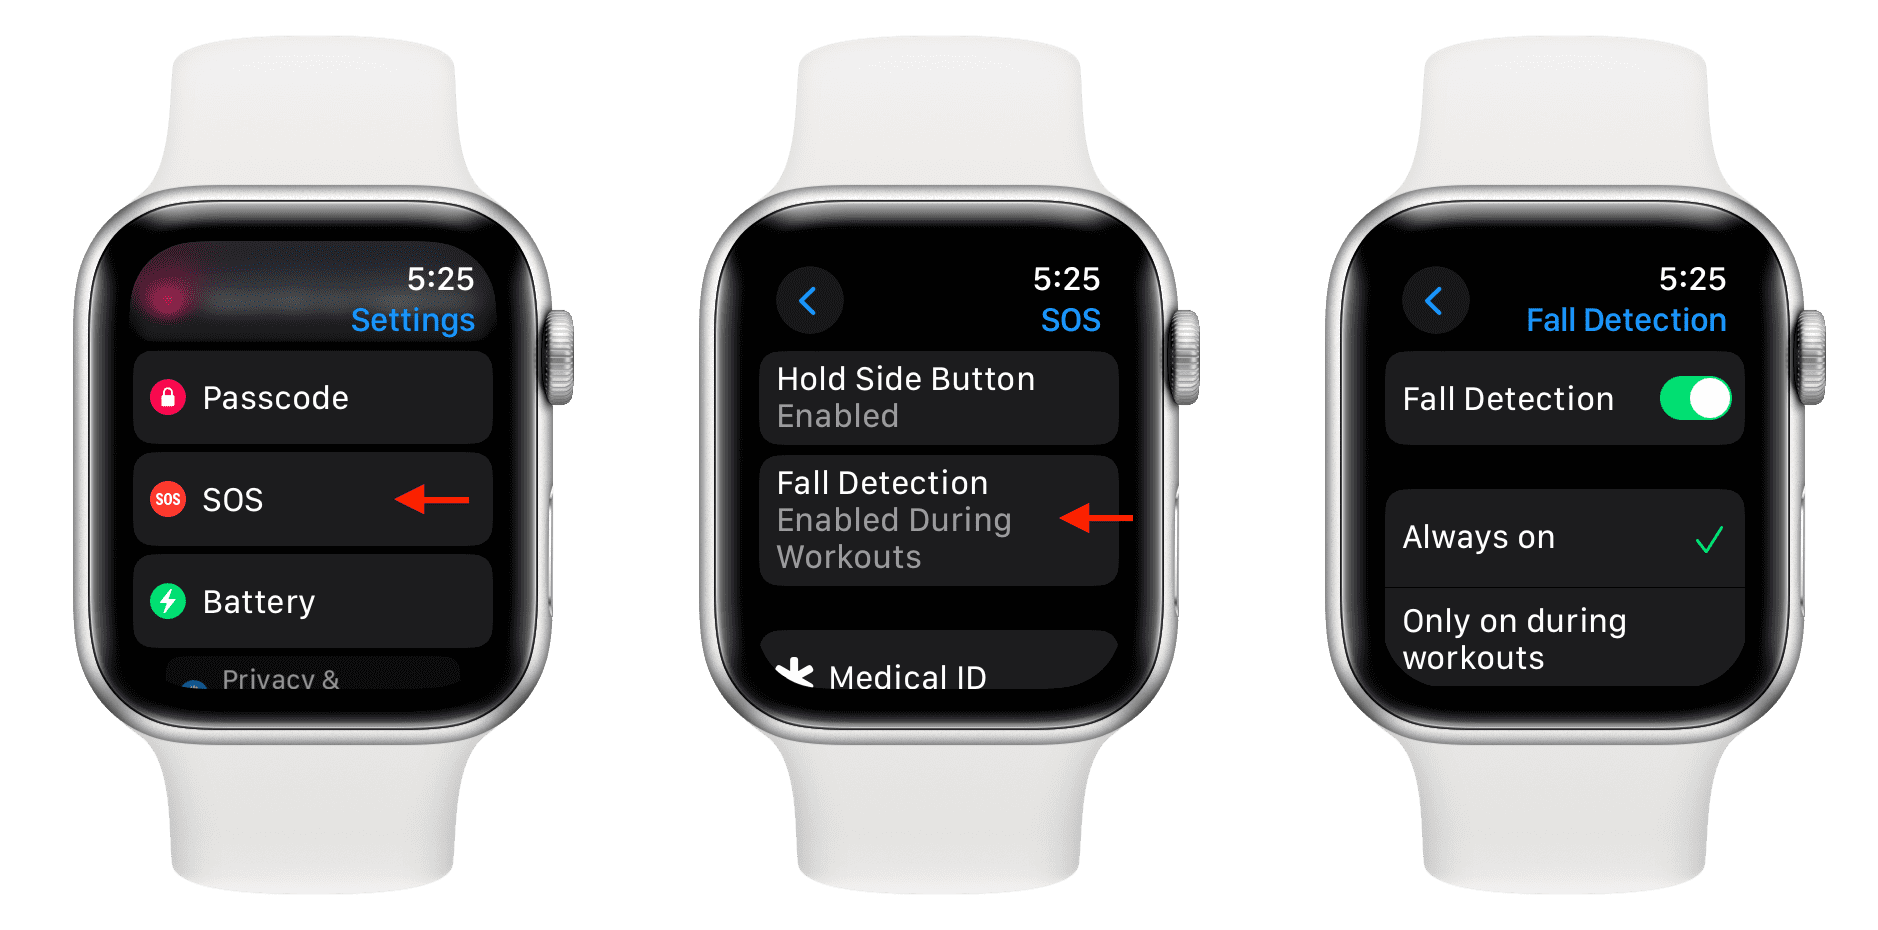 Fall Detection switched on Apple Watch